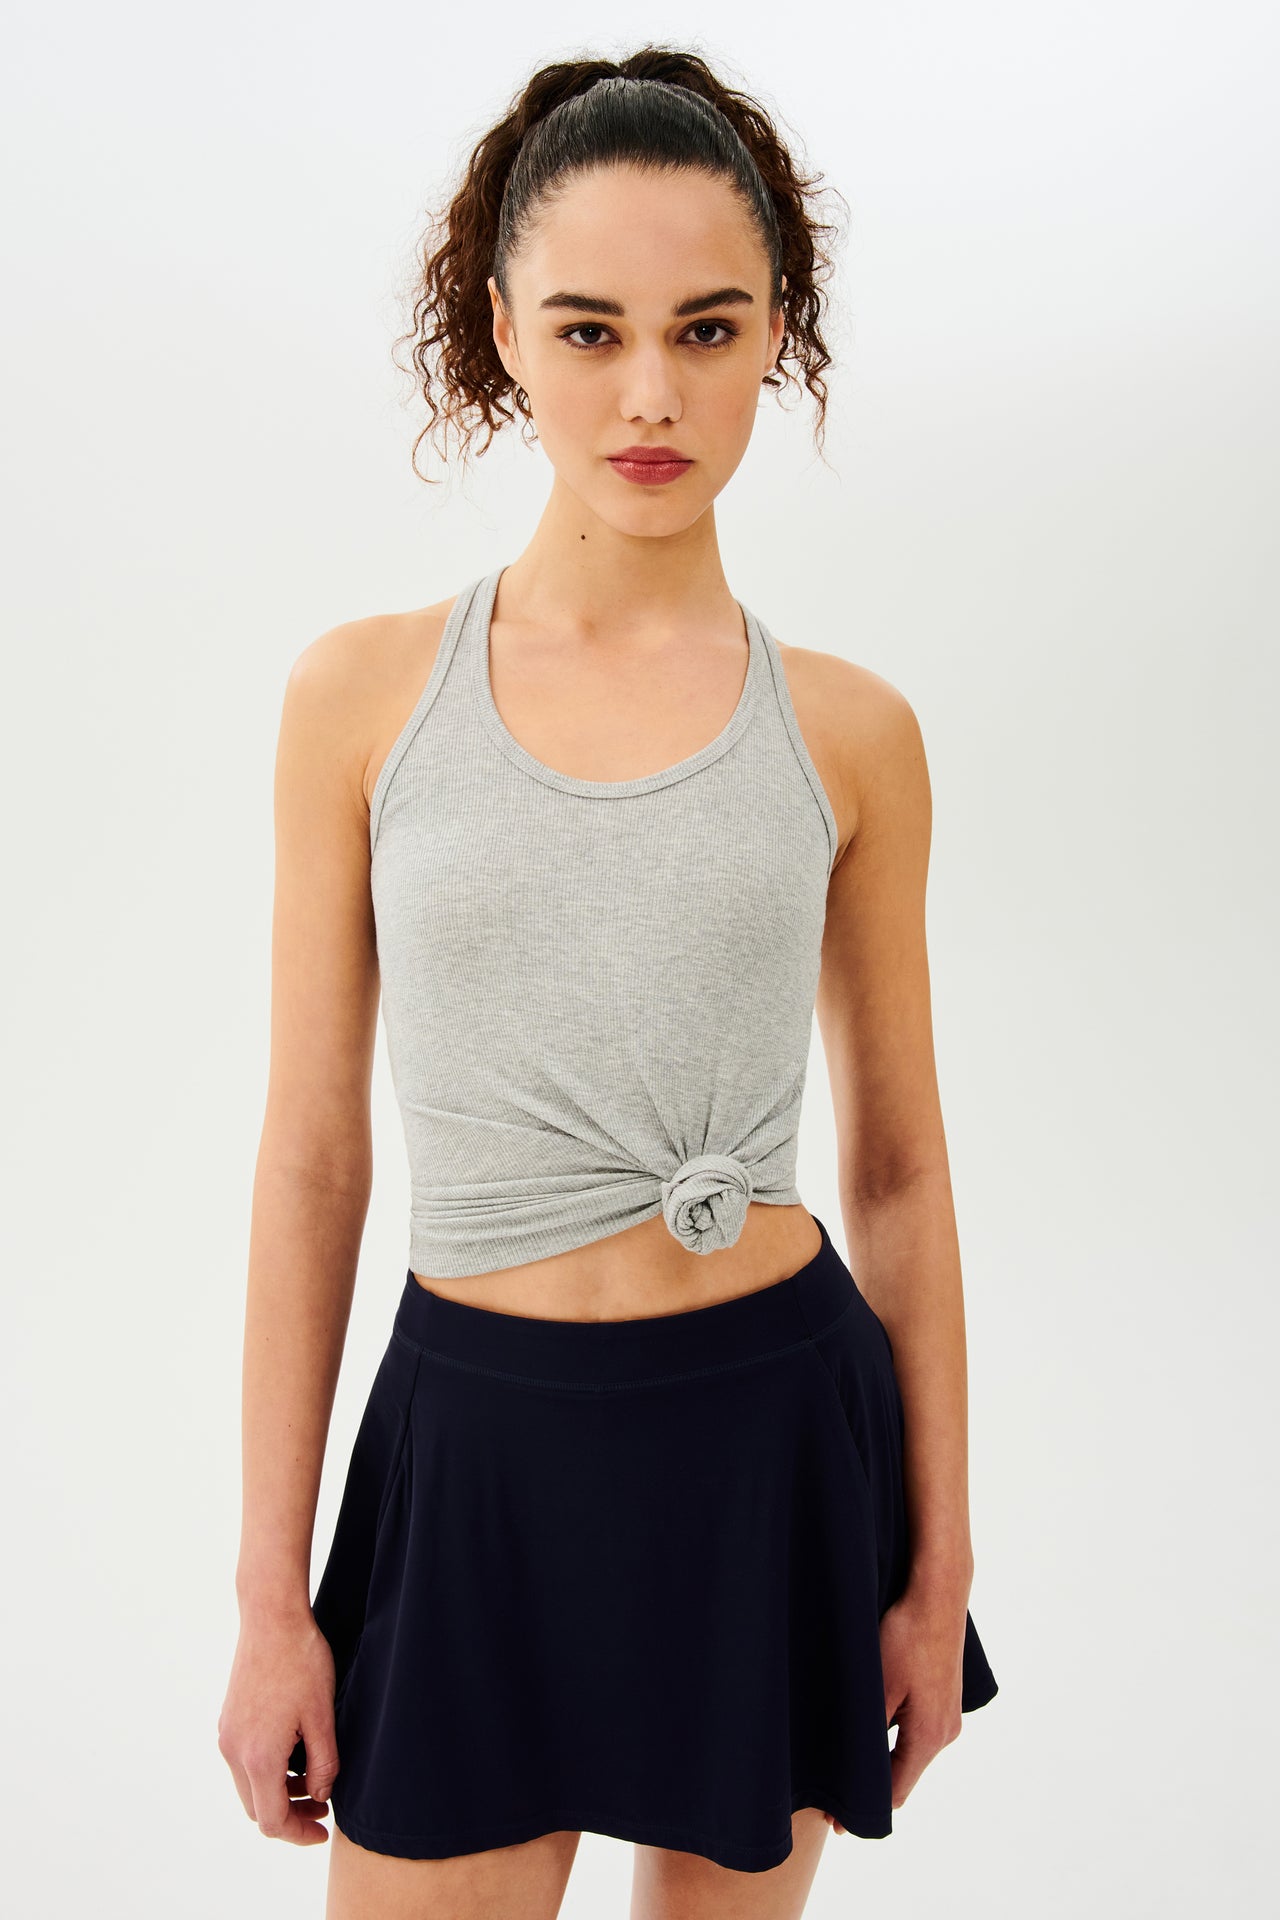 Front view of girl wearing a light grey tank top tied in a knot at the waist and black skirt 